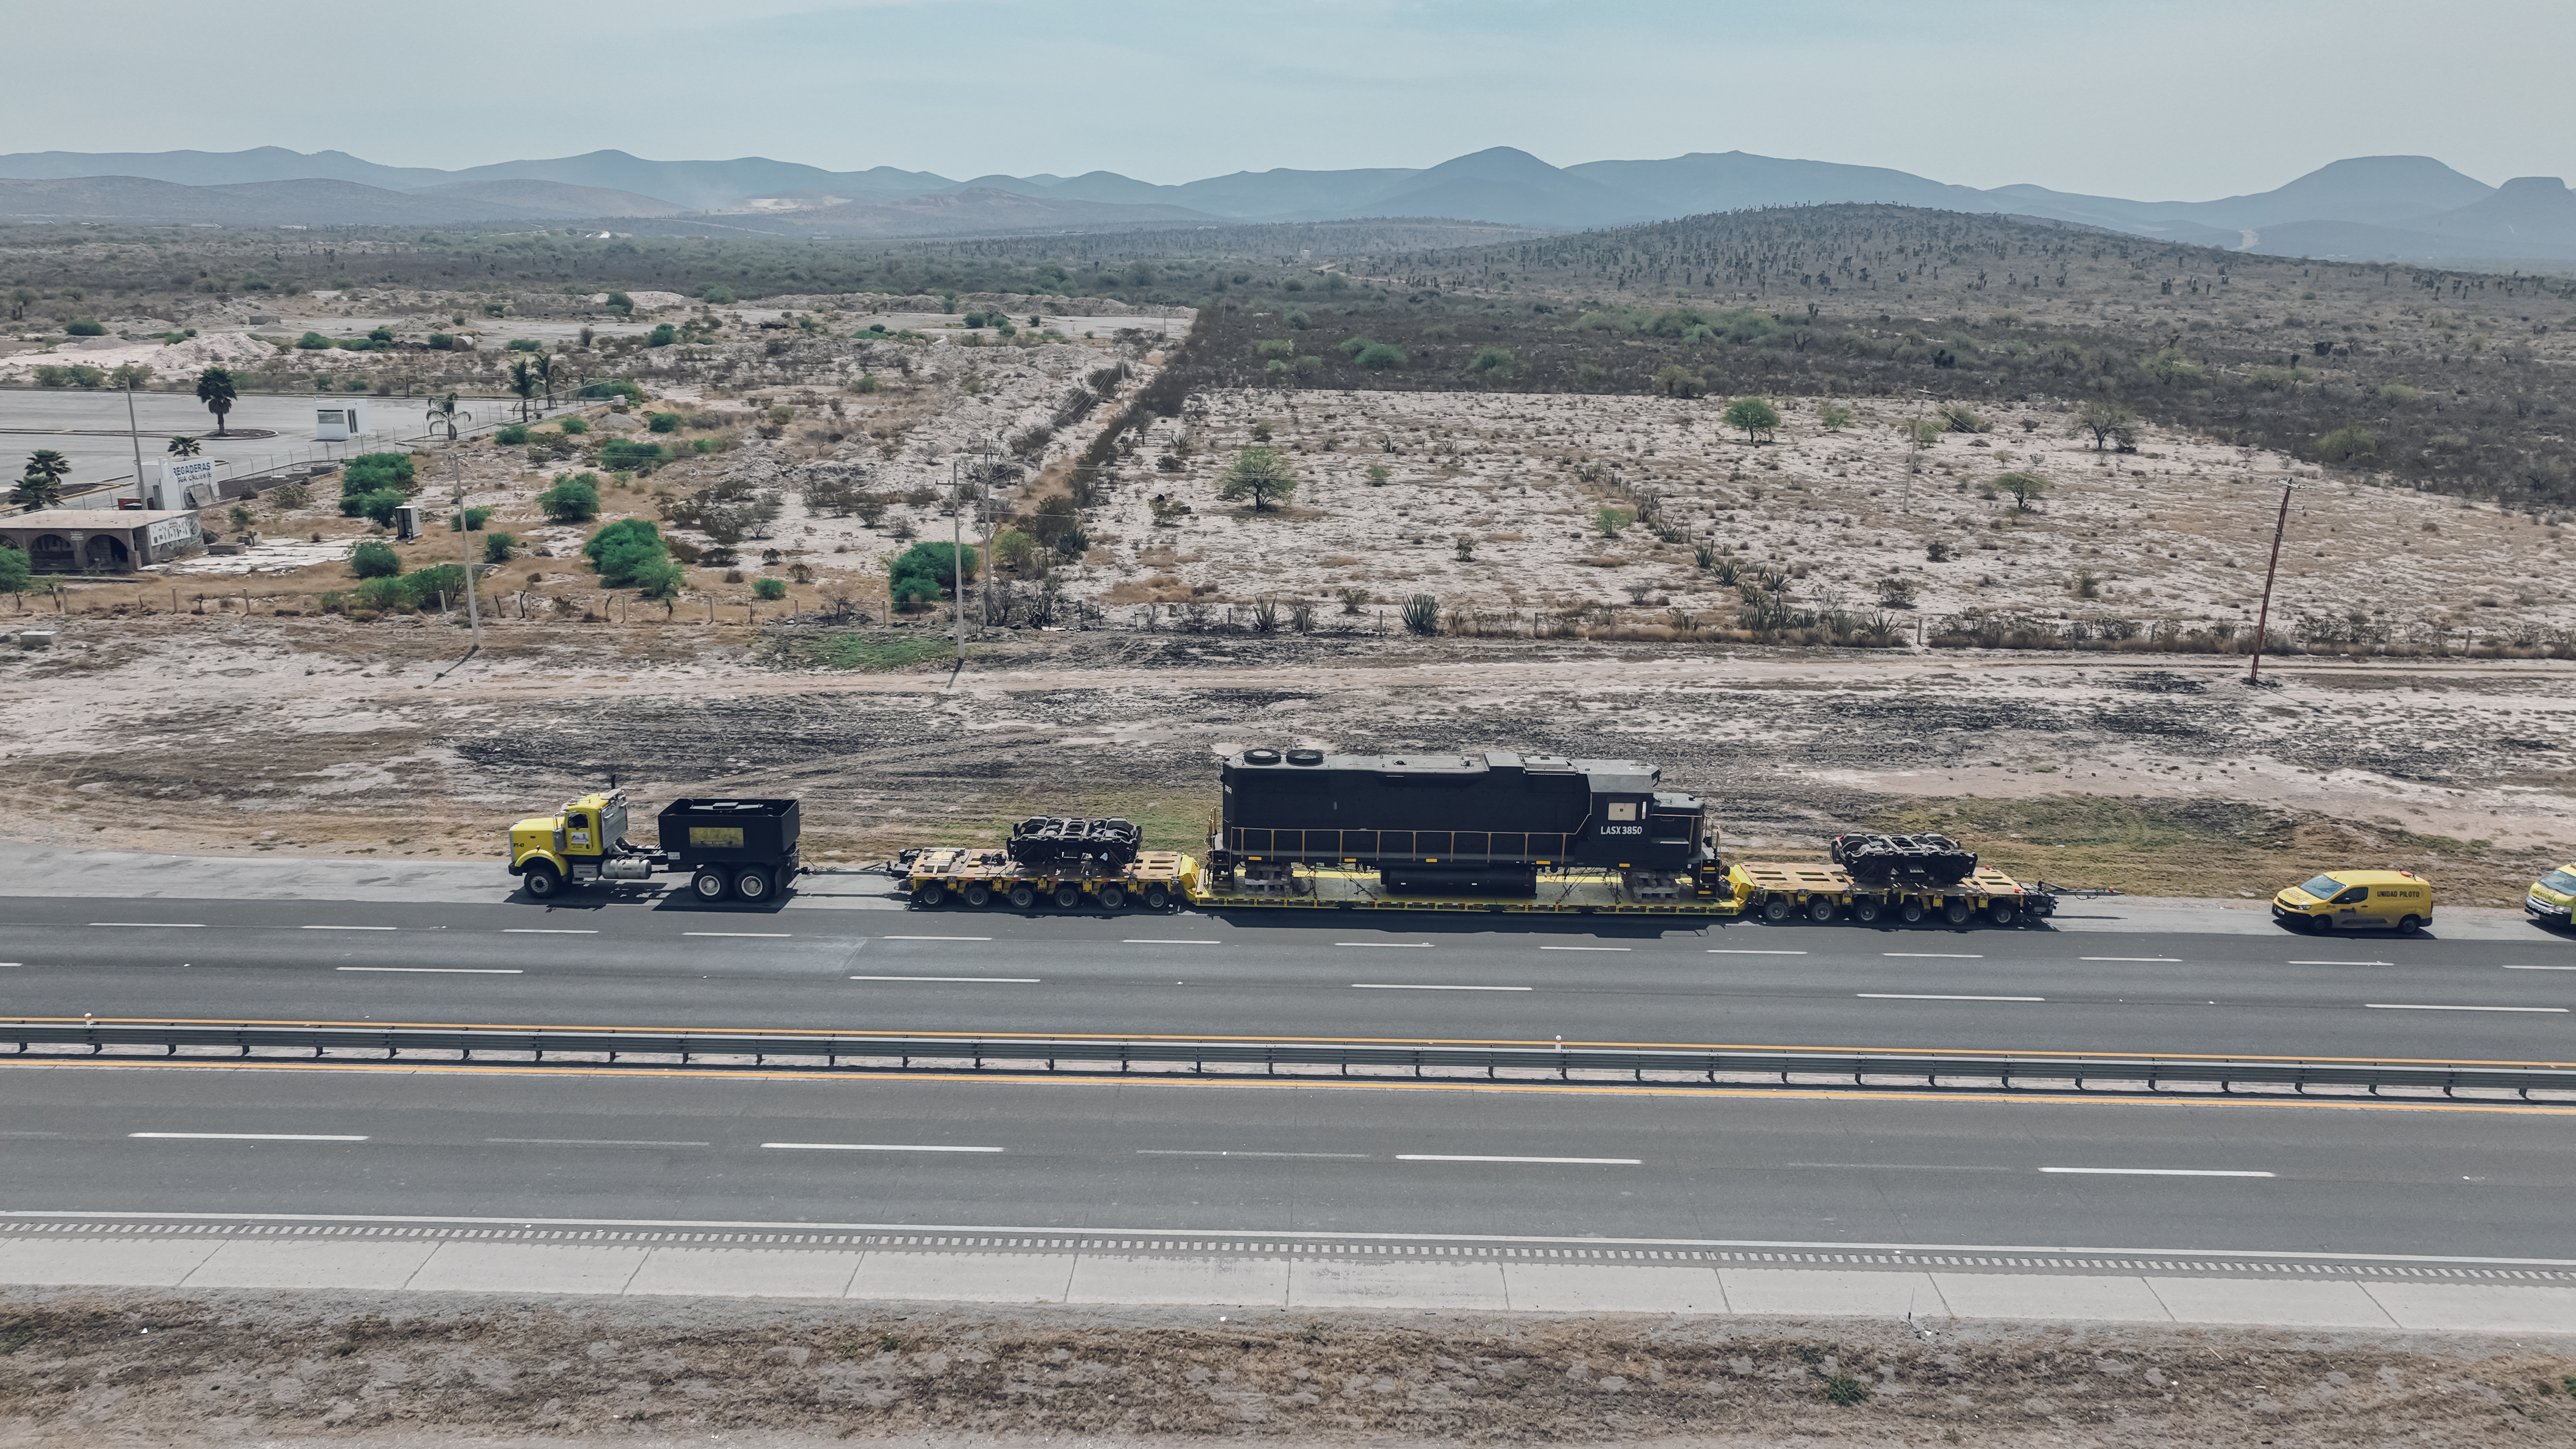 Fast progress was made with the 12-axle THP/SL heavy-duty combination on Mexico’s highways.